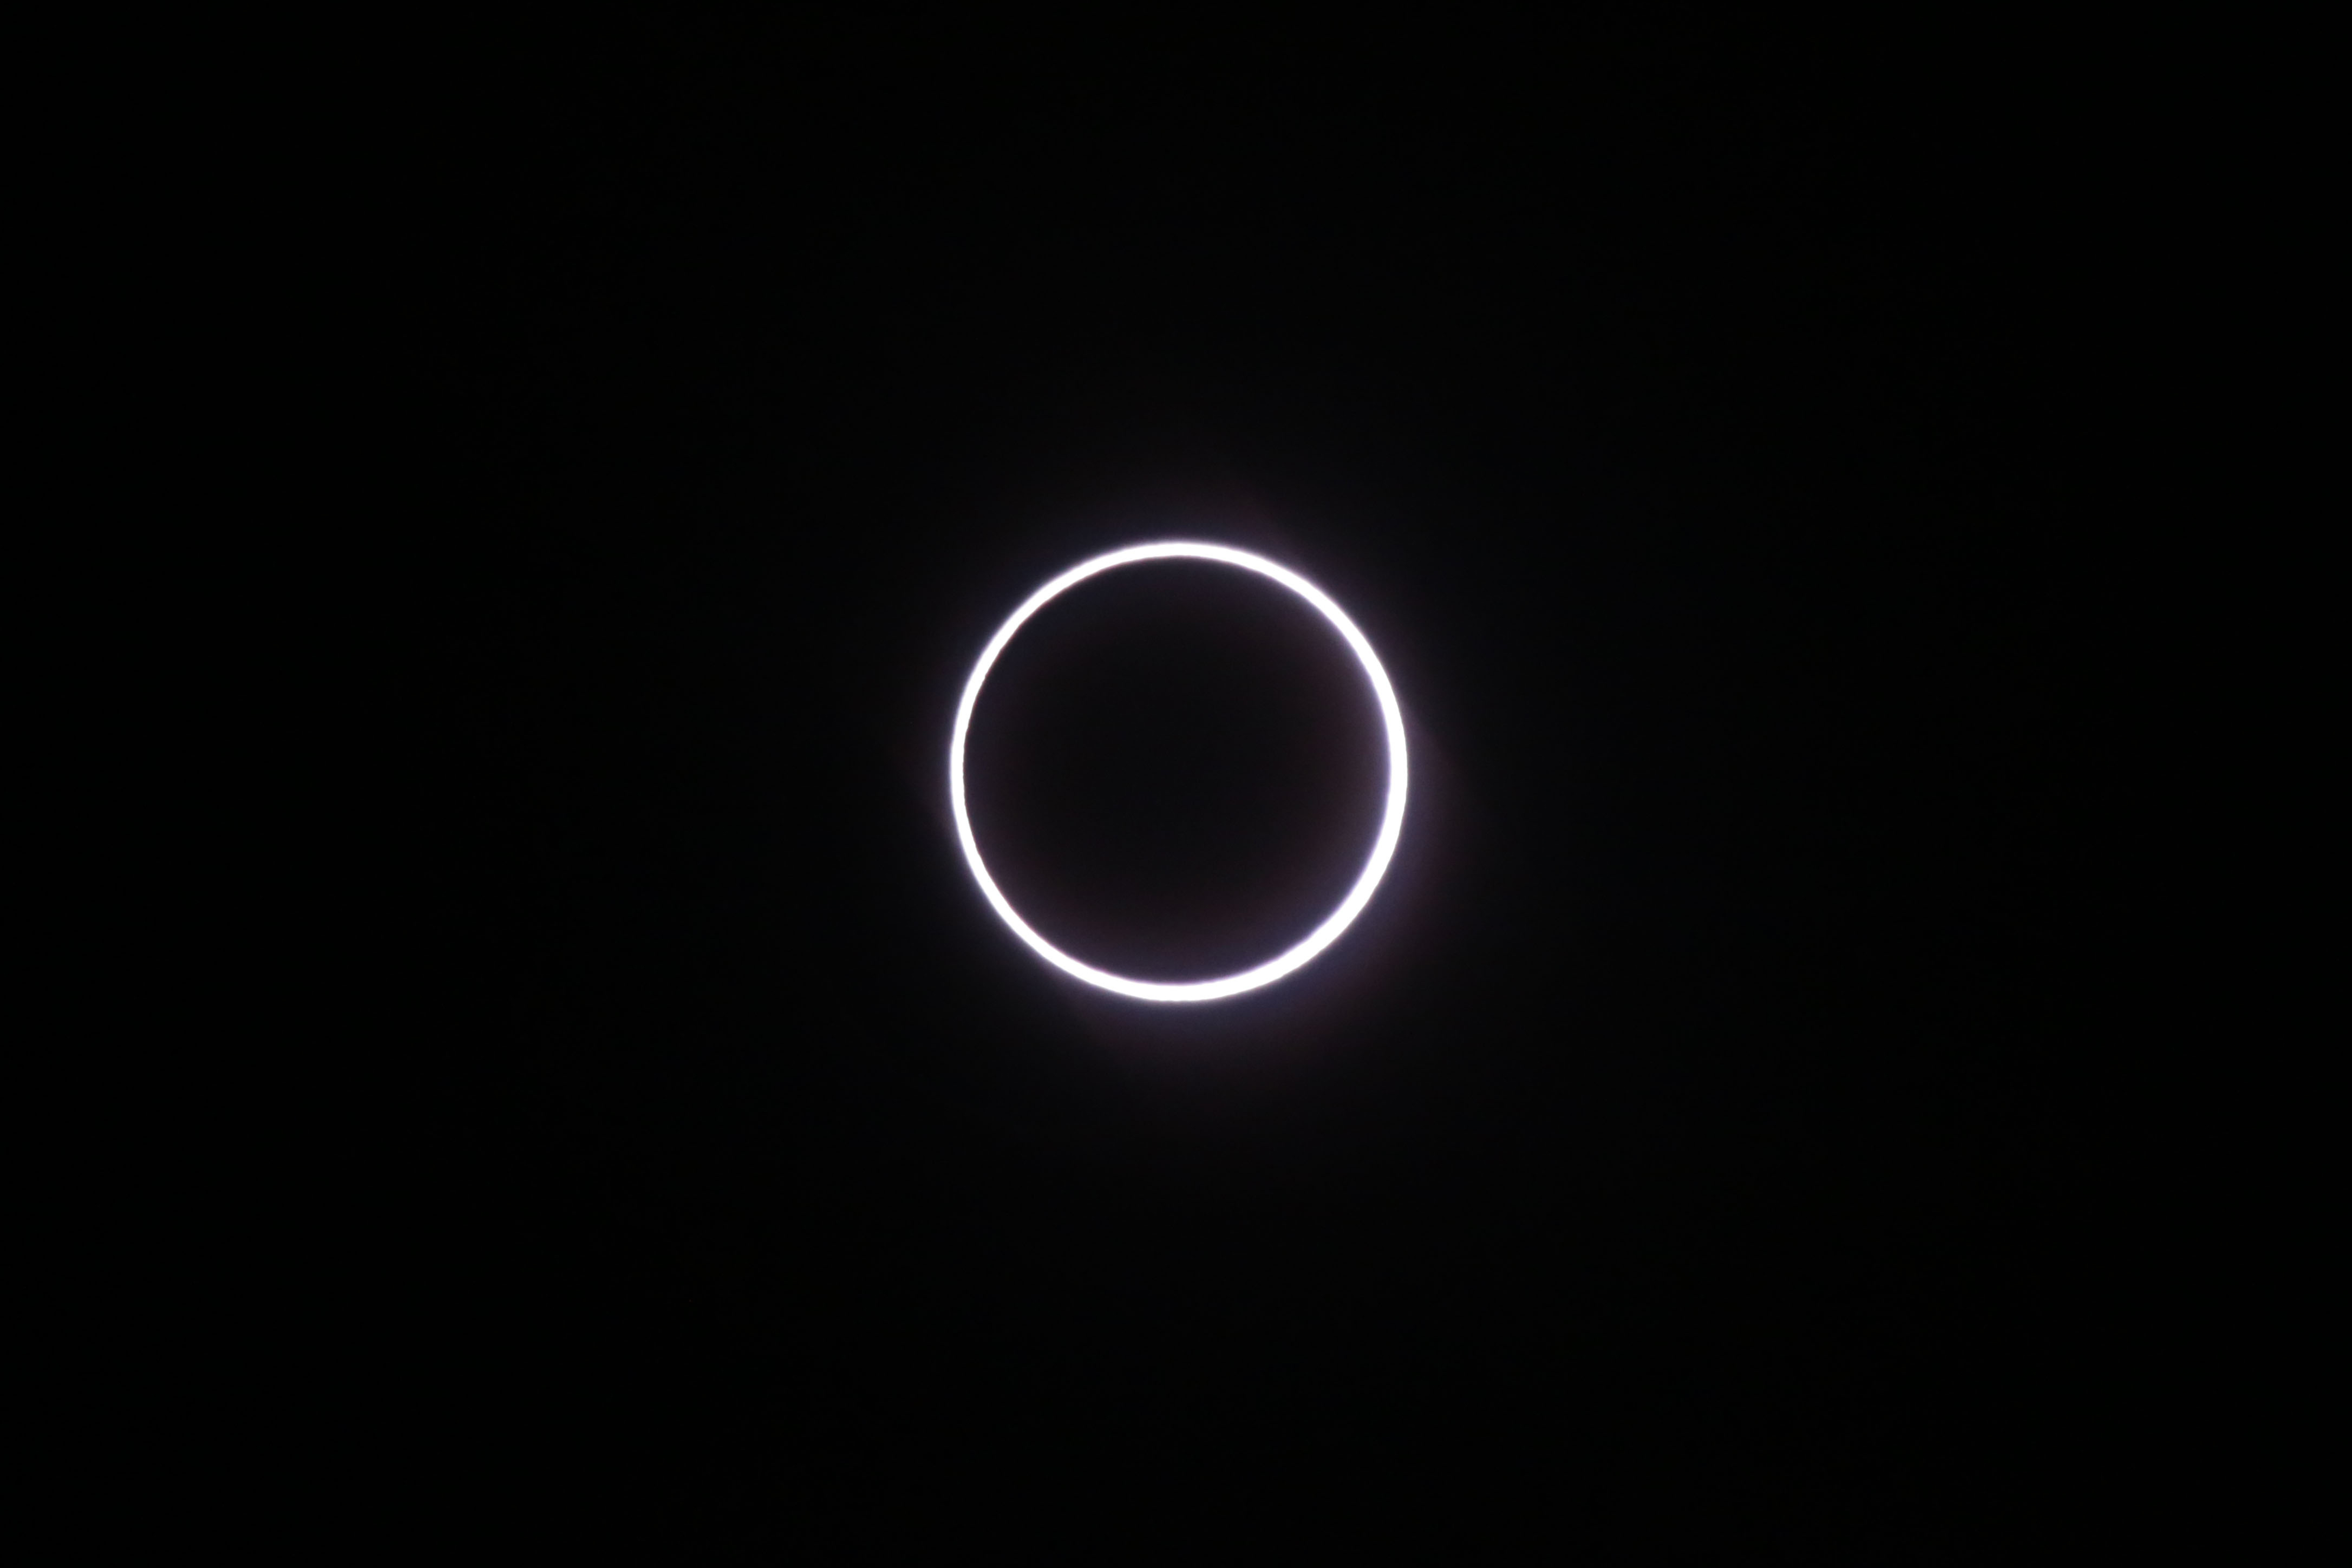 Photo taken on September 1, 2016, in Saint-Louis, on the Indian Ocean island of La Reunion, shows the moon covering the sun, leaving a ring of fire effect around the moon, during an annular solar eclipse. Stargazers in south and central Africa were treated to a spectacular solar eclipse on September 1, 2016 when the Moon wanders into view to make the Sun appear as a "ring of fire", astronomers say. The phenomenon, known as an annular solar eclipse, happens when there is a near-perfect alignment of the Earth, Moon and Sun. But unlike a total eclipse, when the Sun is blacked out, sometimes the Moon is too far from Earth, and its apparent diameter too small, for complete coverage.  / AFP PHOTO / Richard BOUHET